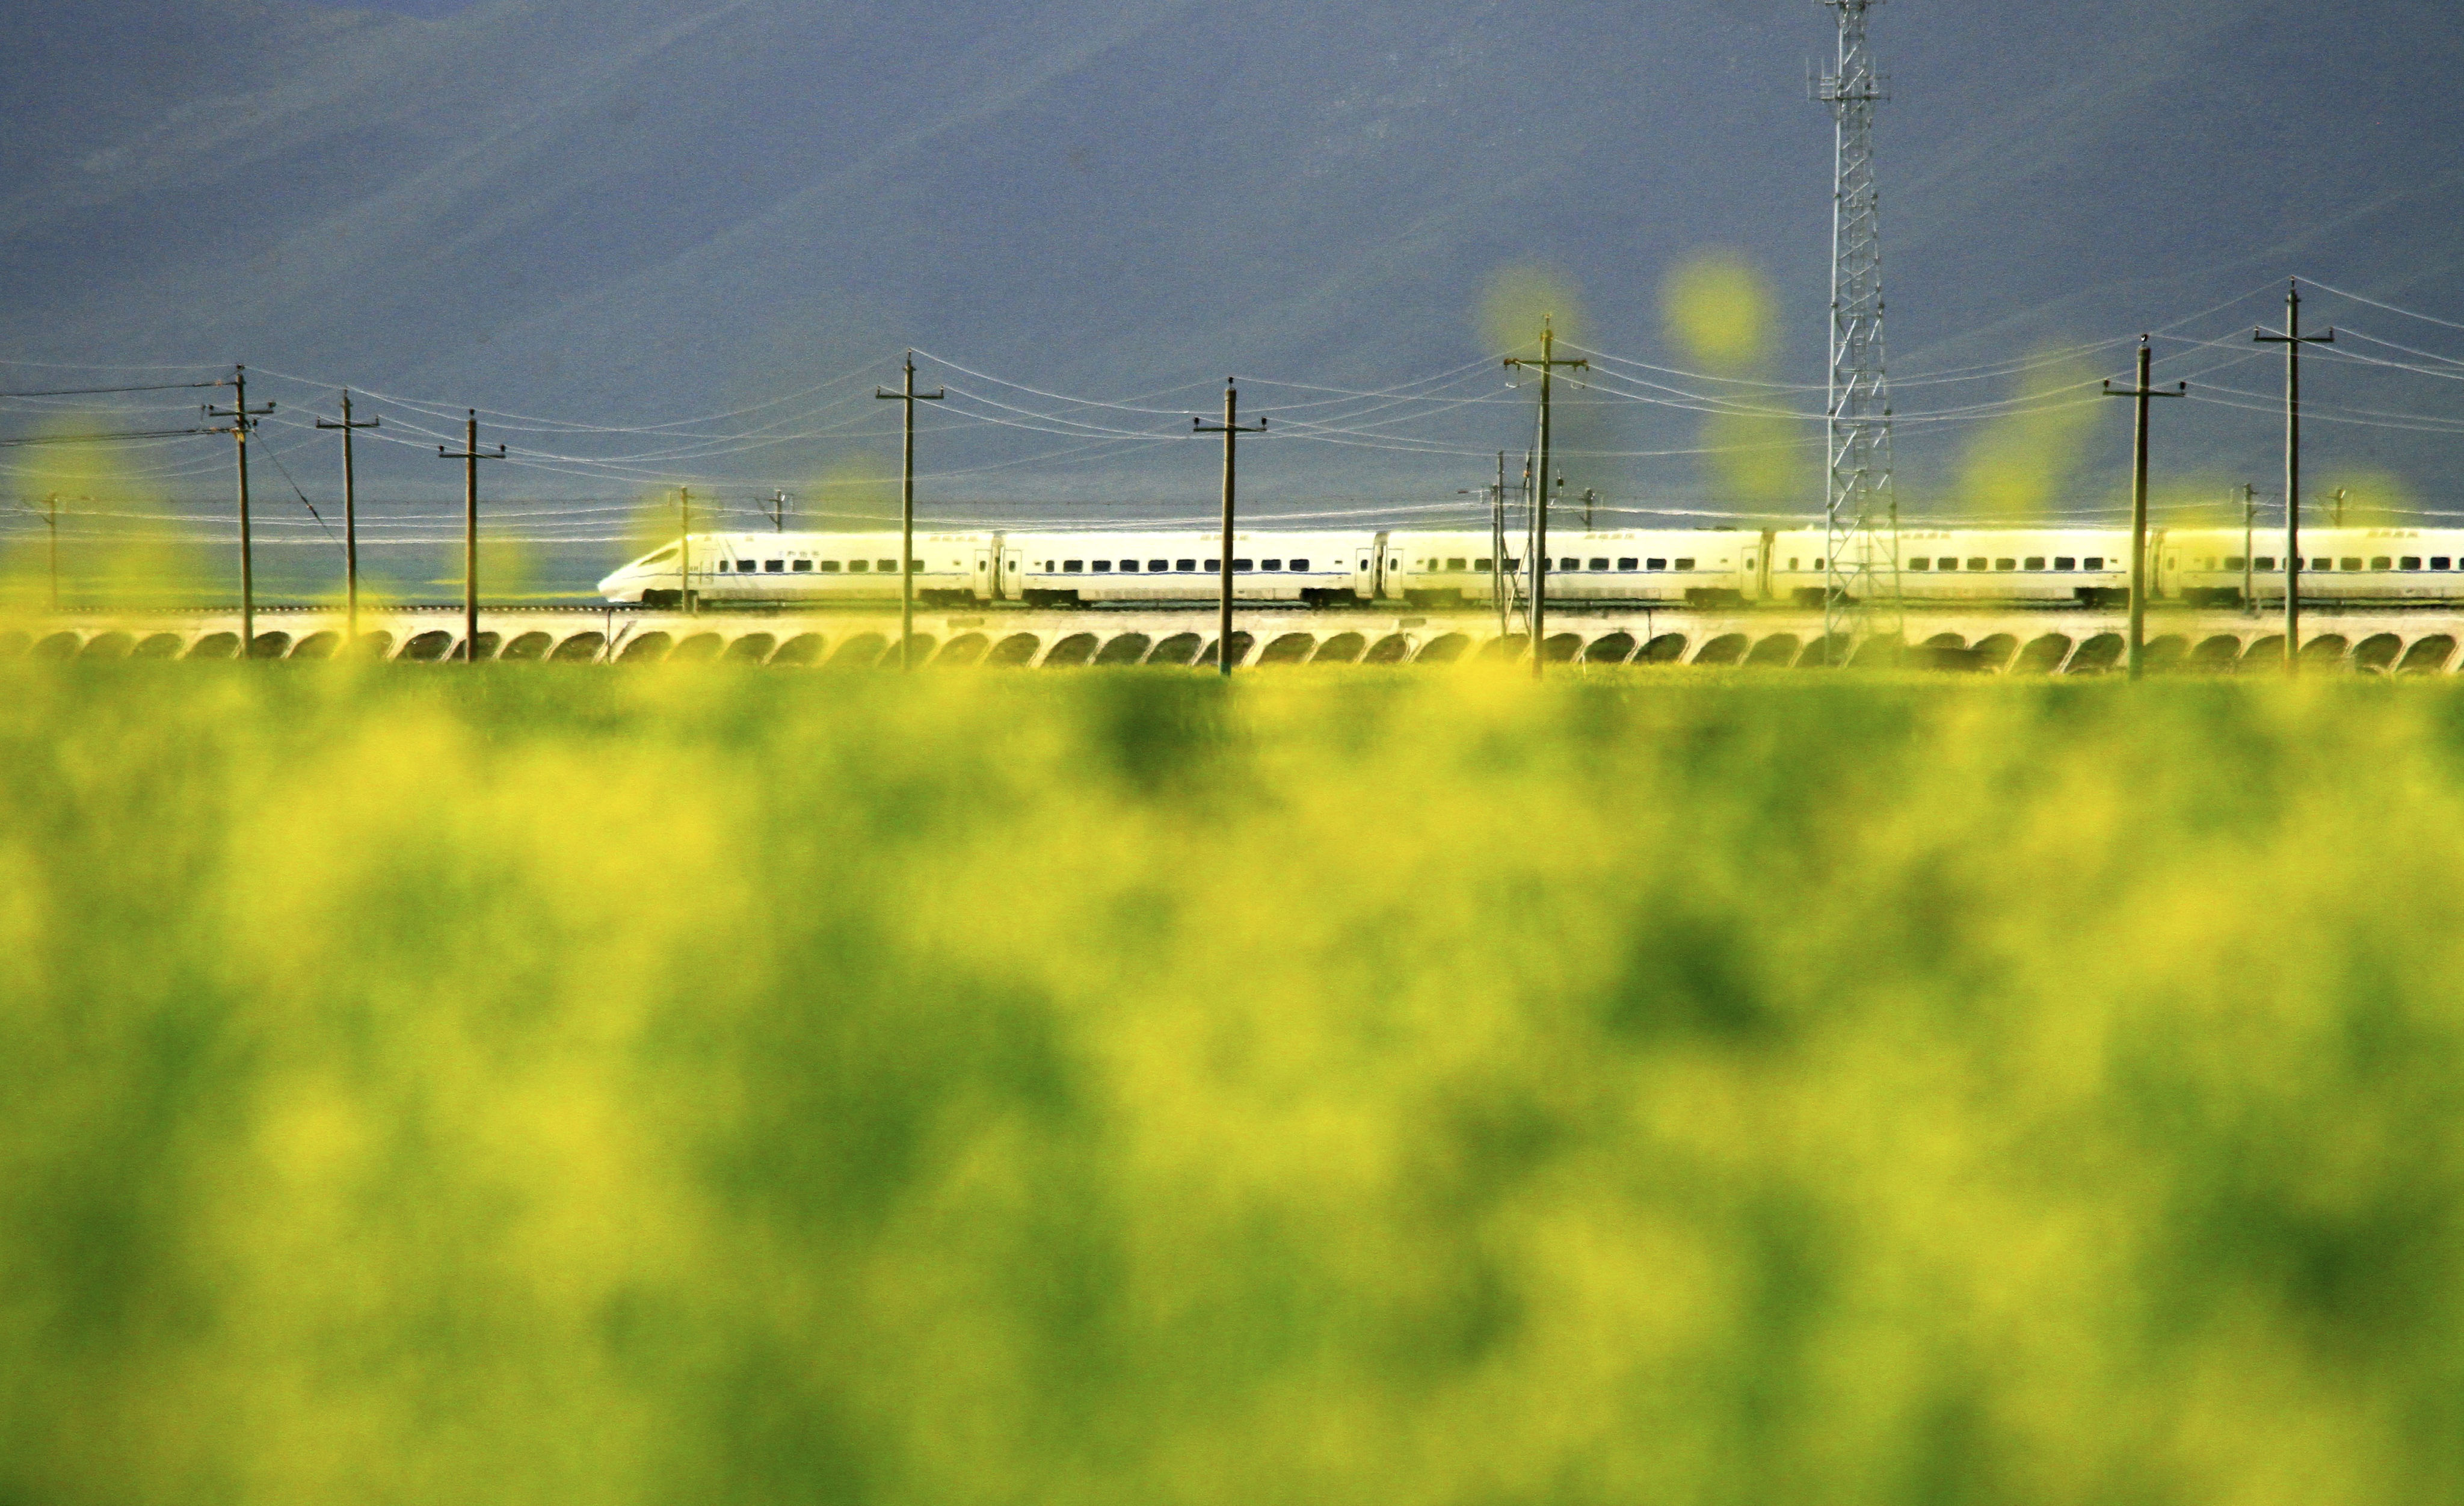 The Lanxin Express connects Lanzhou to Urumqi, covering 1,736km (1,078 miles) of mostly Gobi Desert terrain in the west of China. Photo: Xinhua